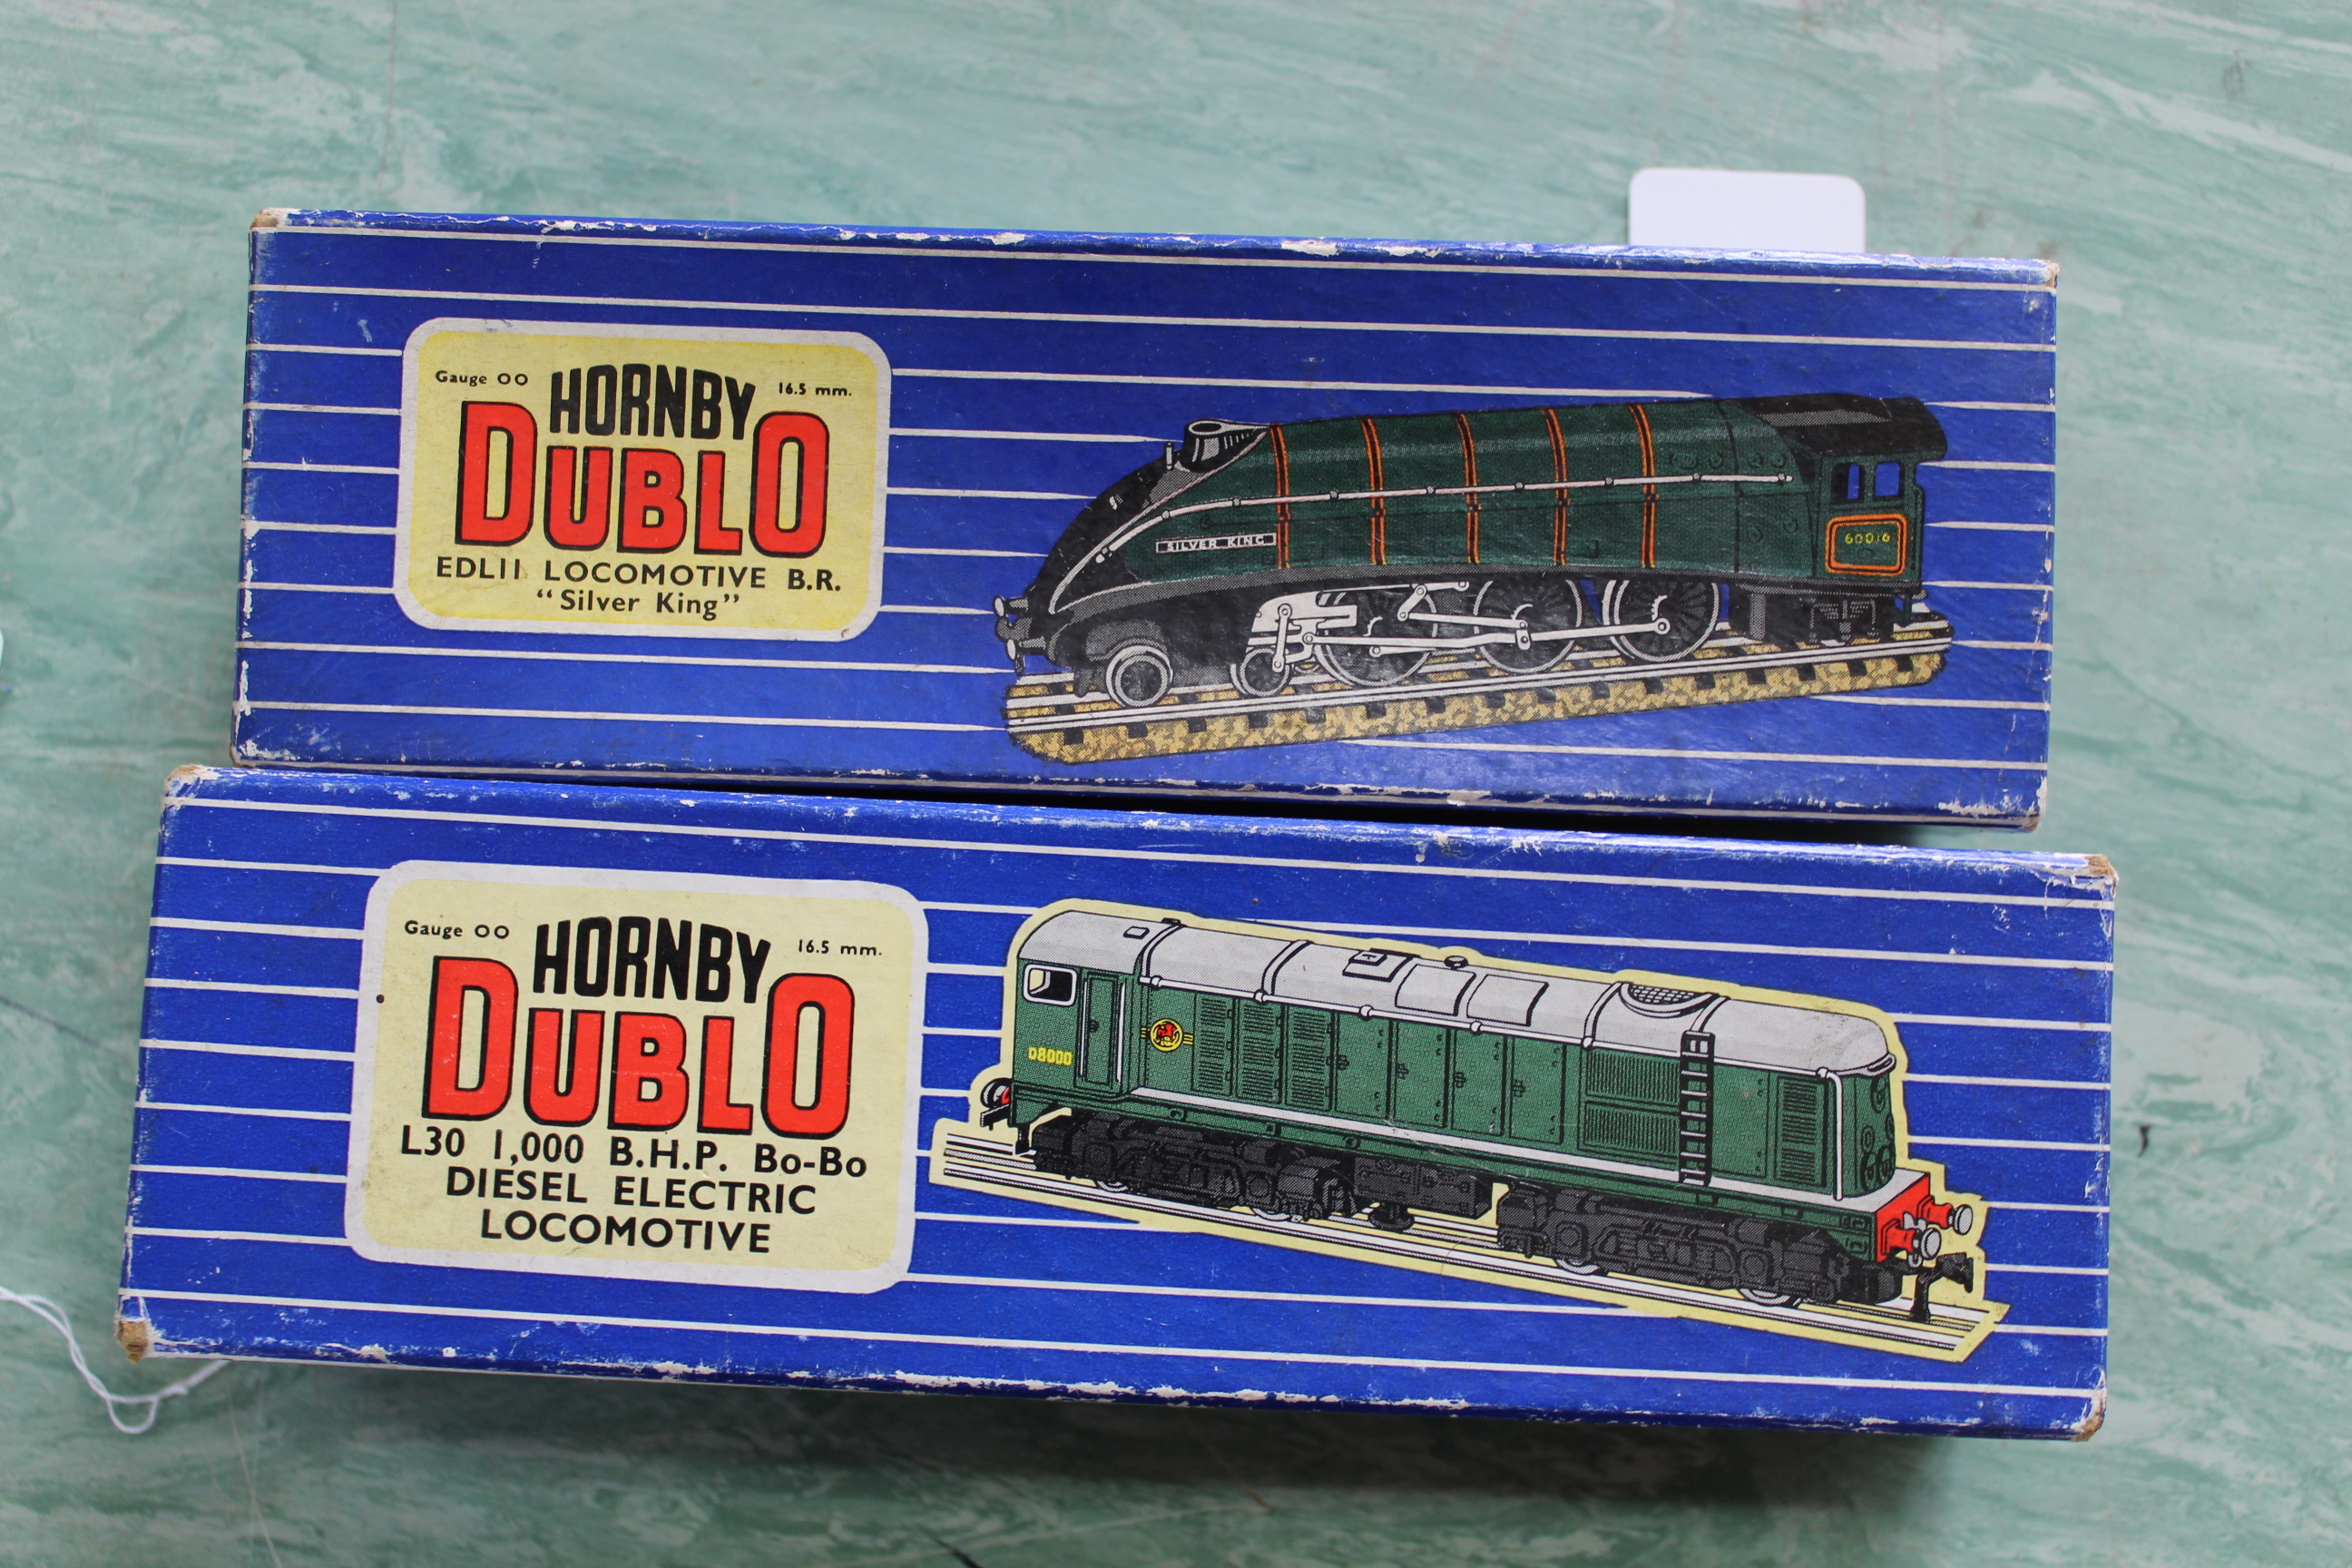 Two boxed Hornby Dublo locomotives EDL II 'Silver King' and L30 (good condition boxes with signs of